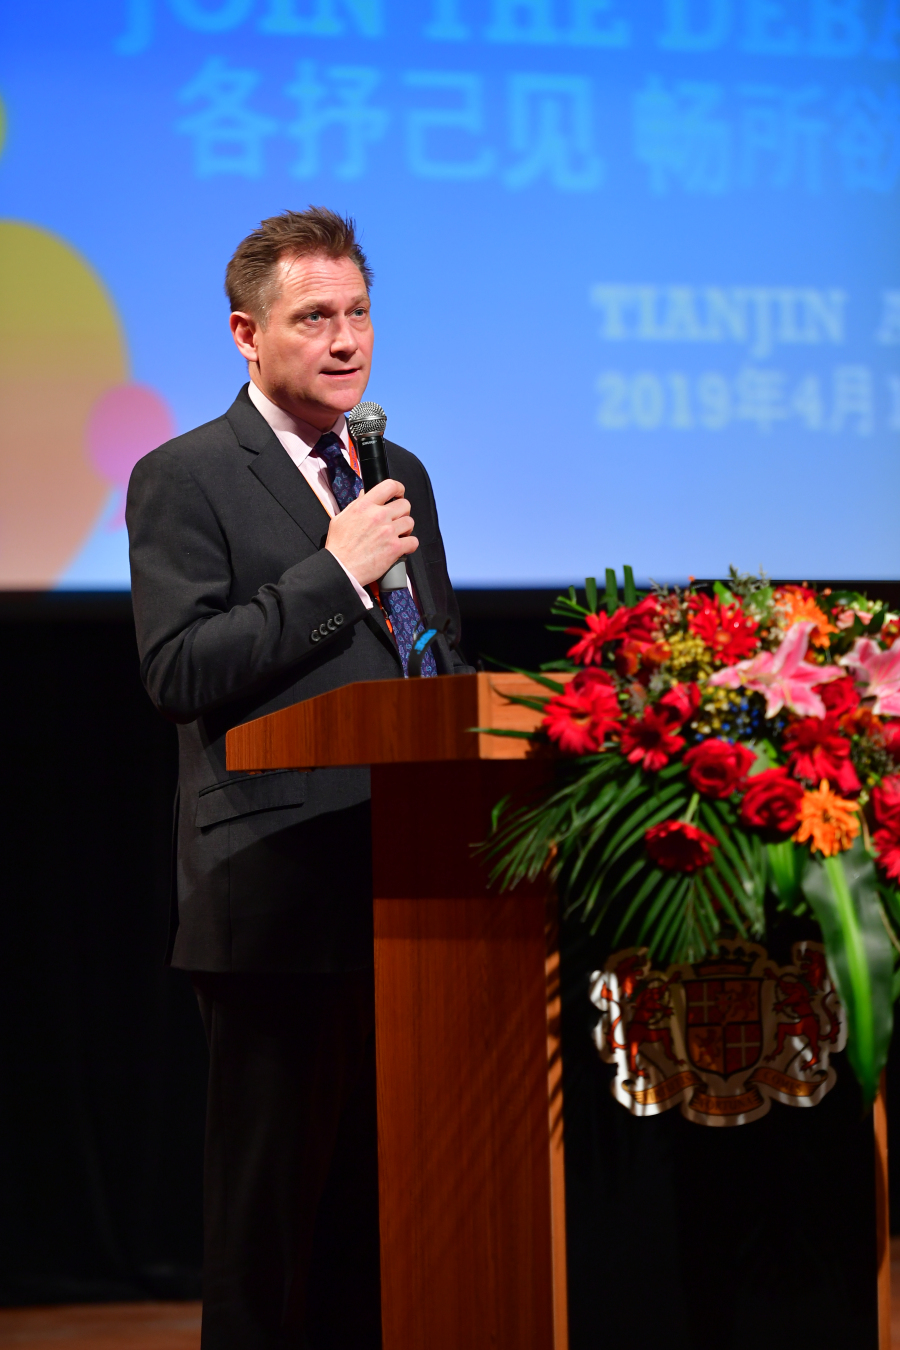 Julian Jeffrey Master of Wellington College Tianjin delivered a welcome speech